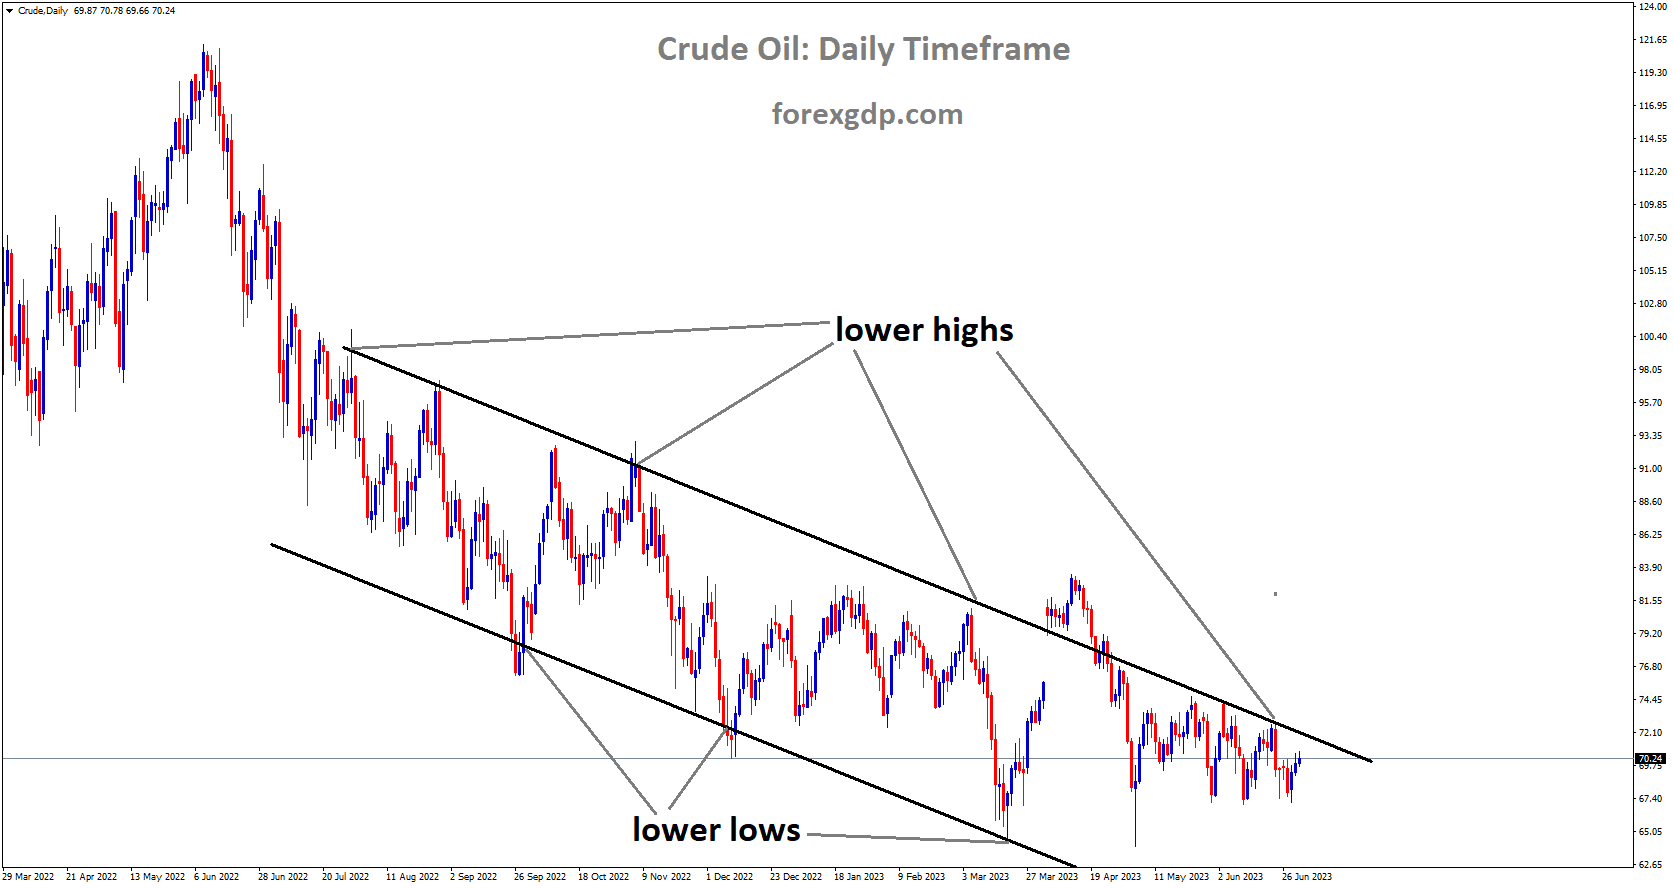 Crude oil is moving in Descending channel and the market has reached the lower high area of the channel.